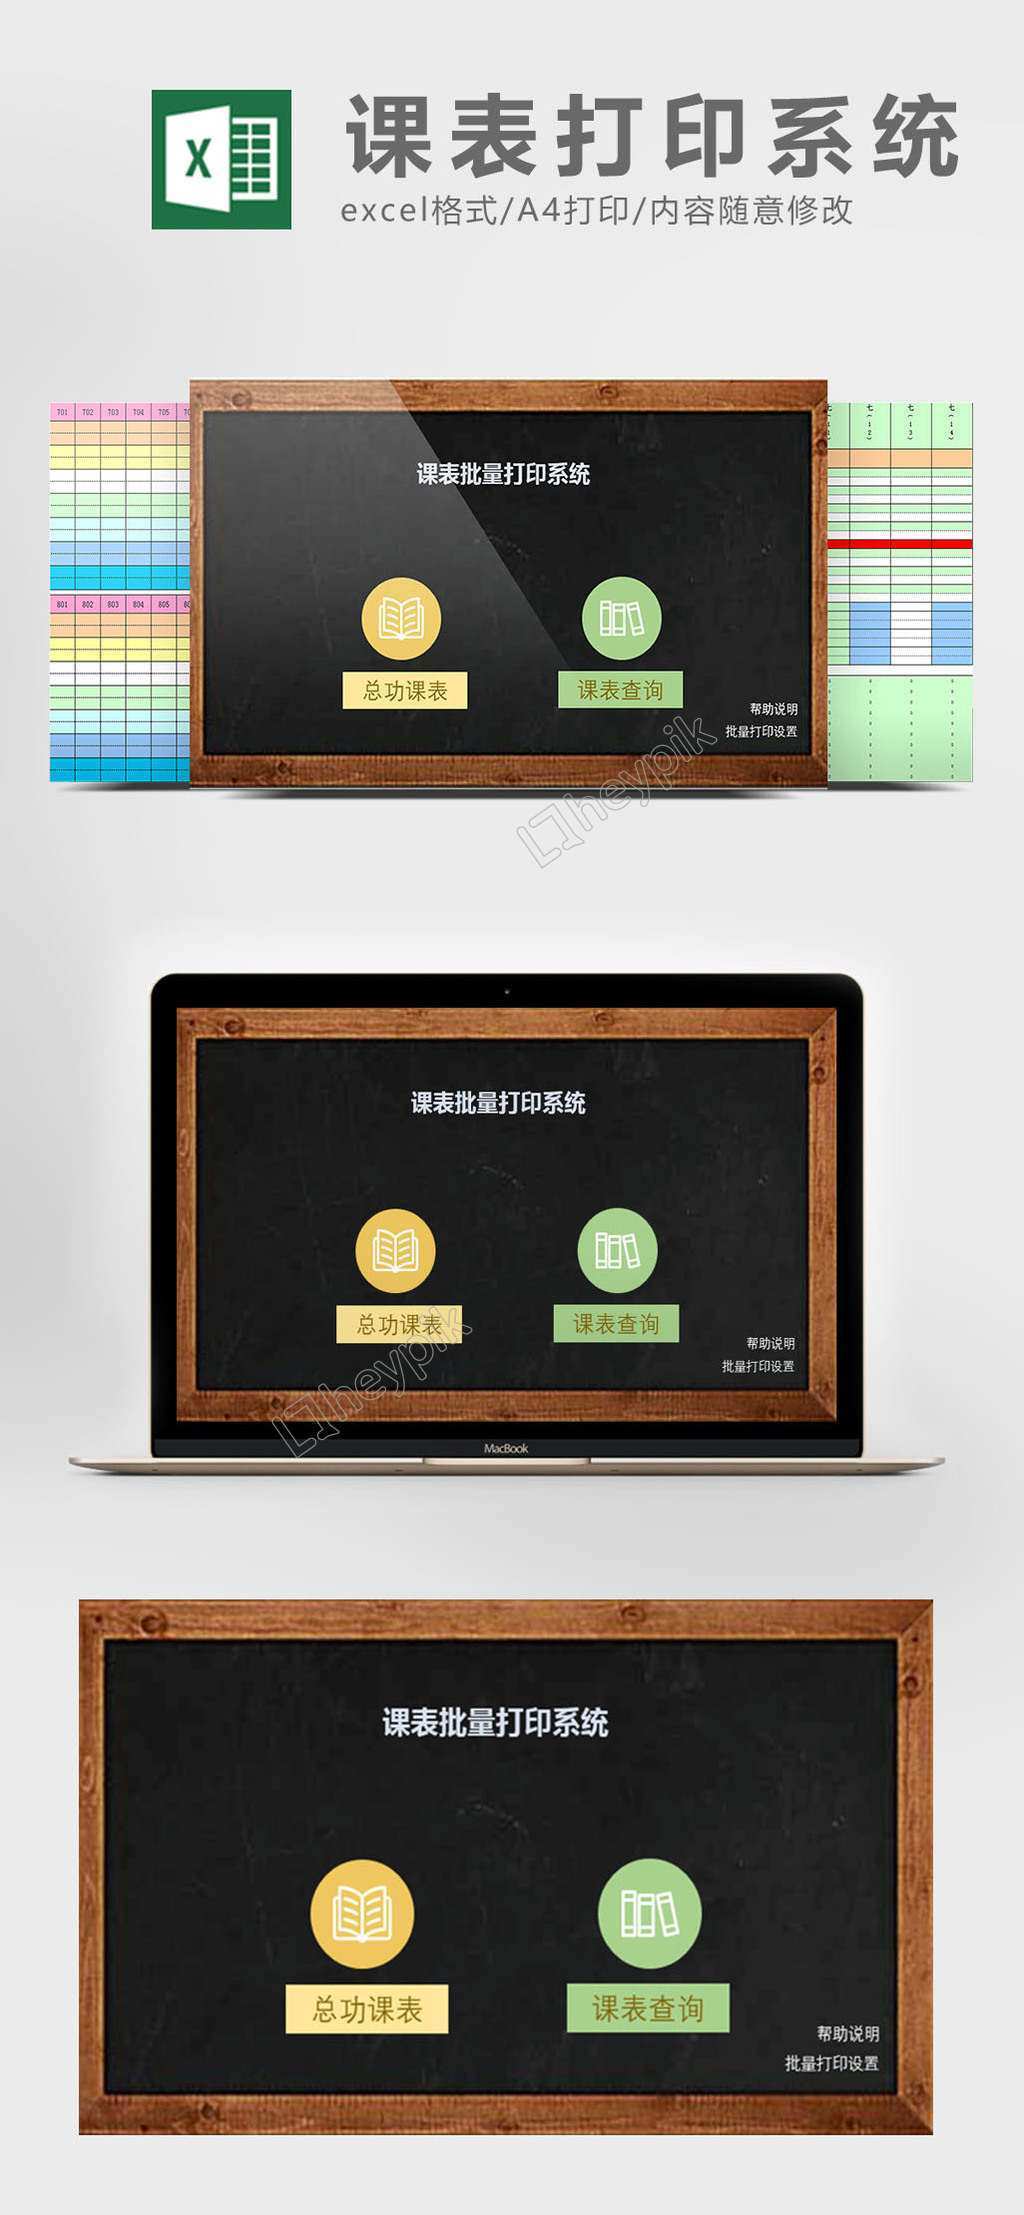 36 Free Class Schedule Template Powerpoint Photo with Class Schedule Template Powerpoint